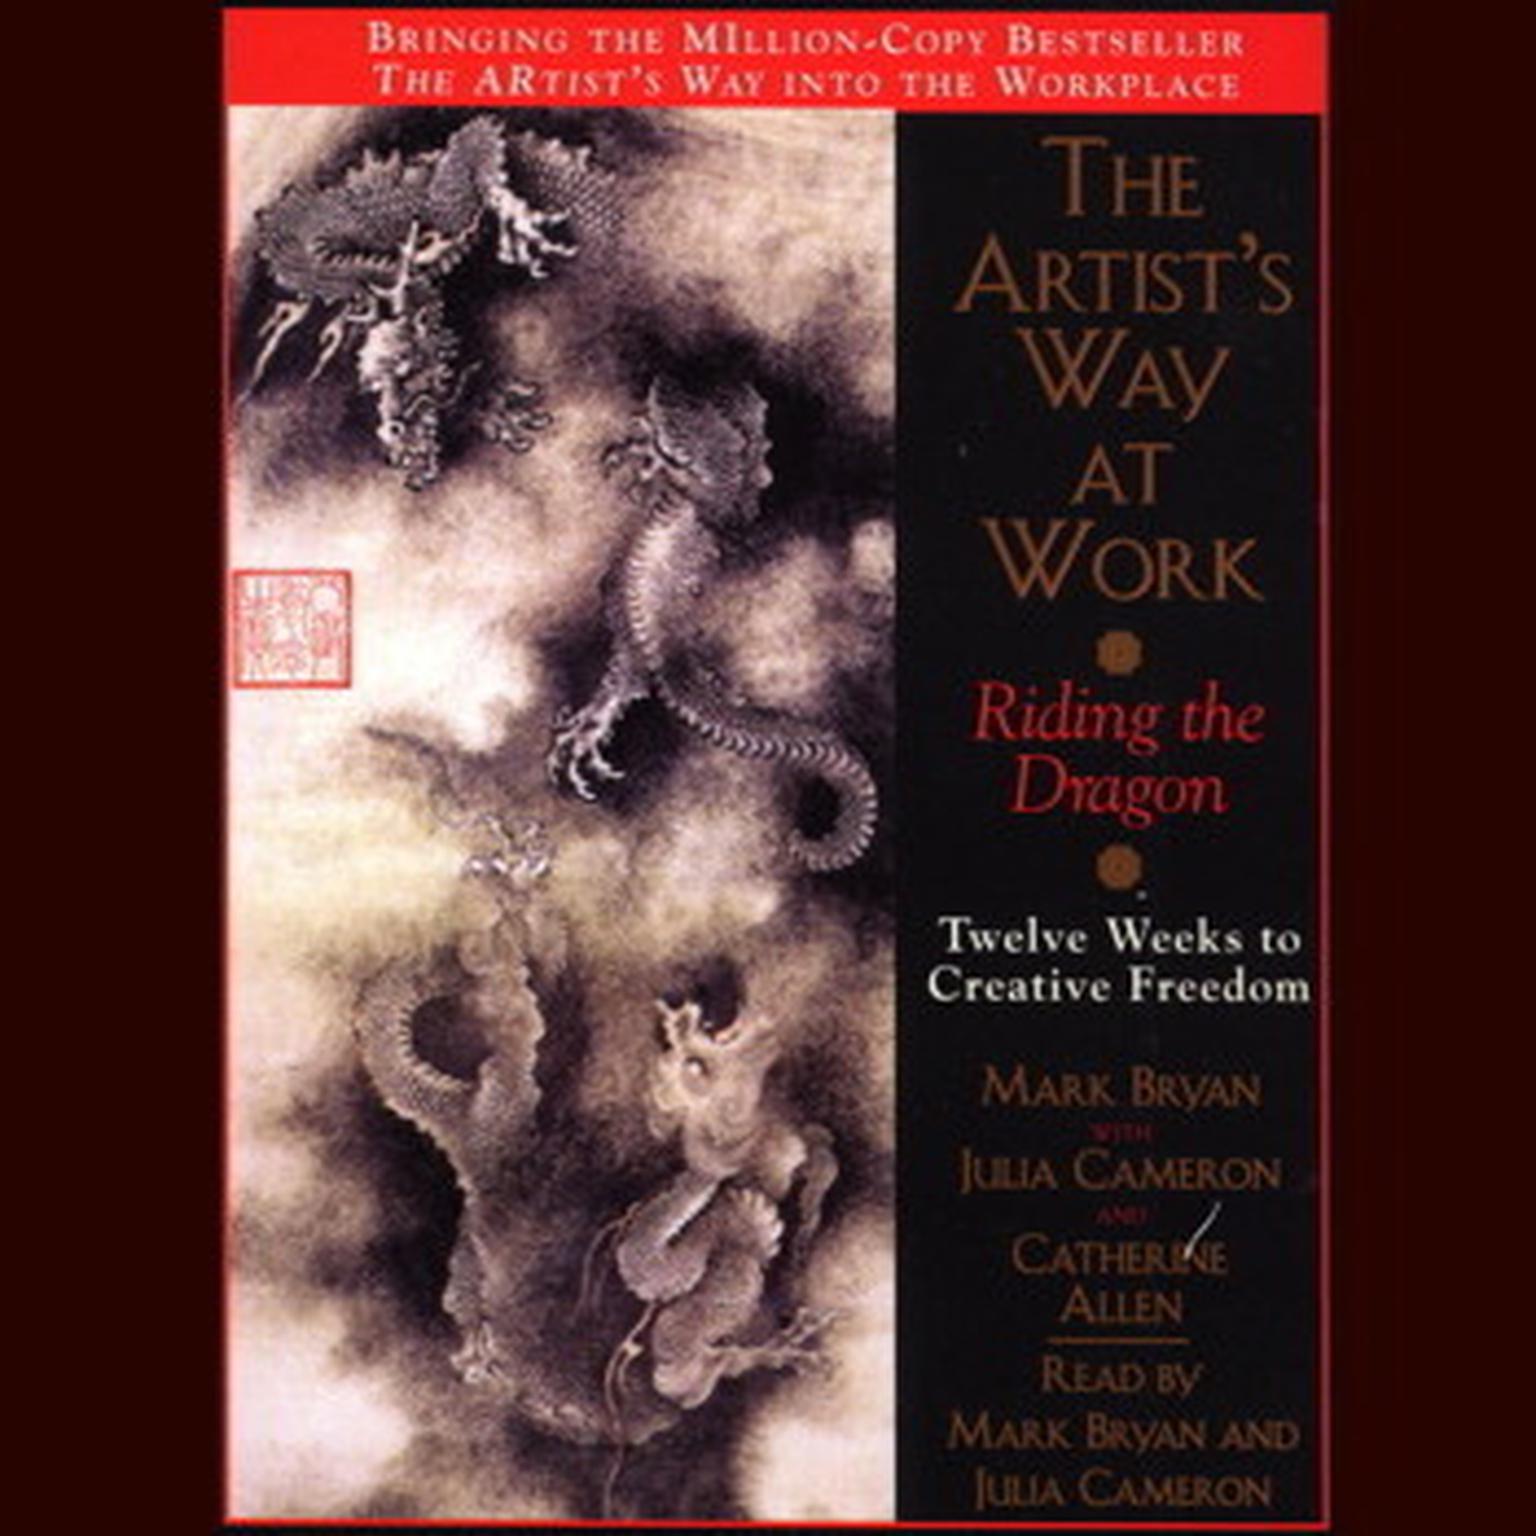 The Artists Way at Work (Abridged): Riding the Dragon: Twelve Weeks to Creative Freedom Audiobook, by Mark Bryan